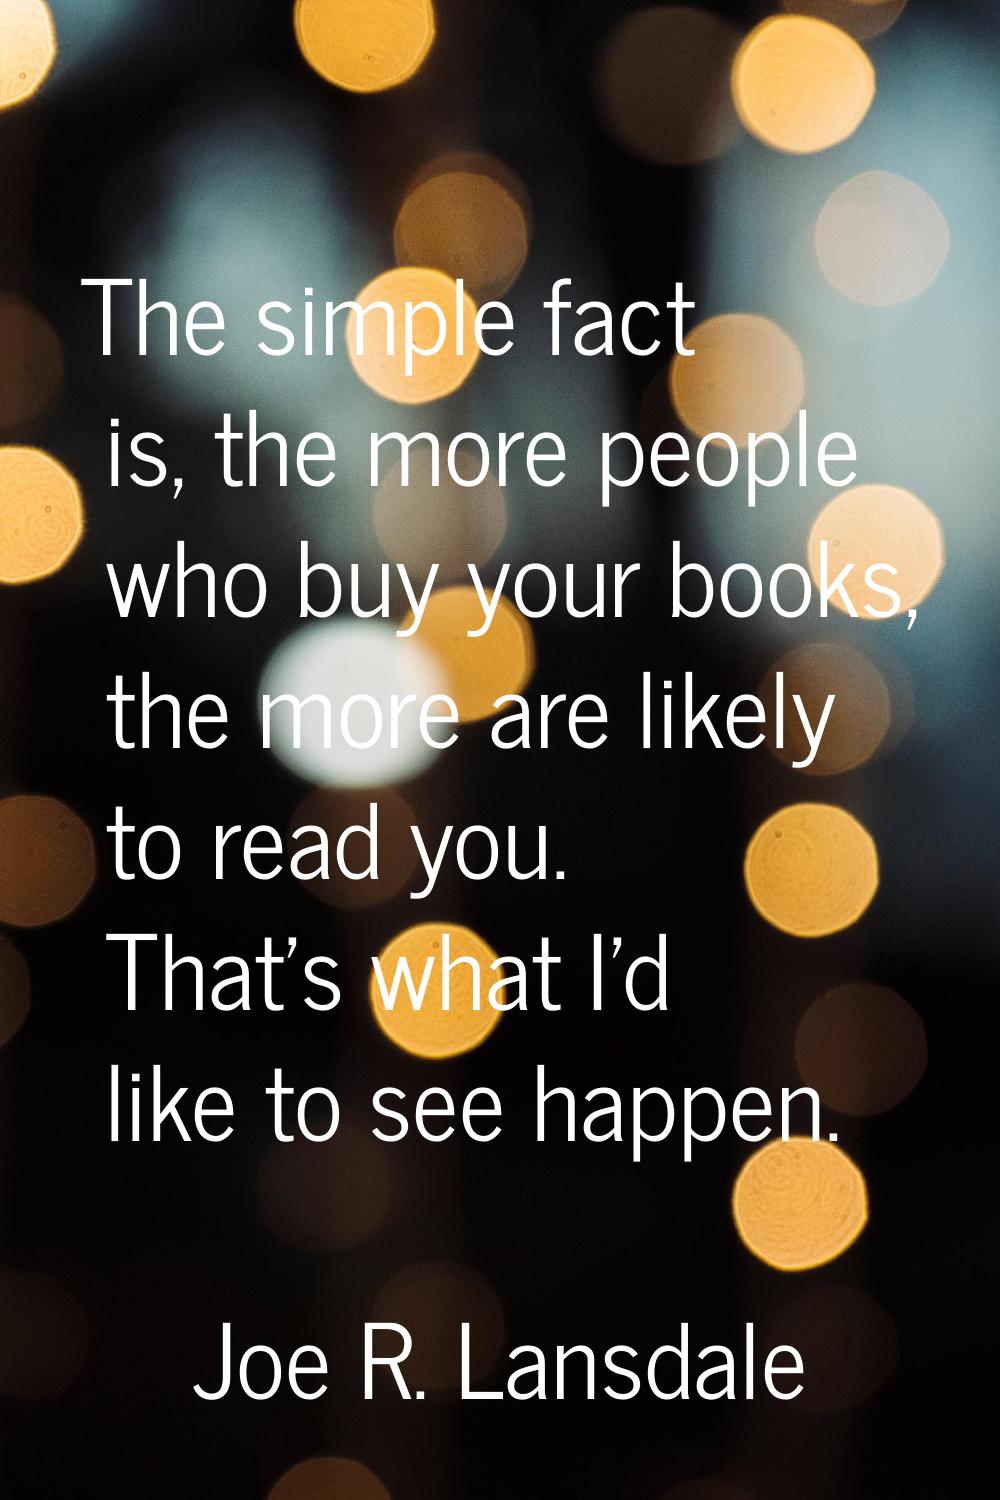 The simple fact is, the more people who buy your books, the more are likely to read you. That's wha